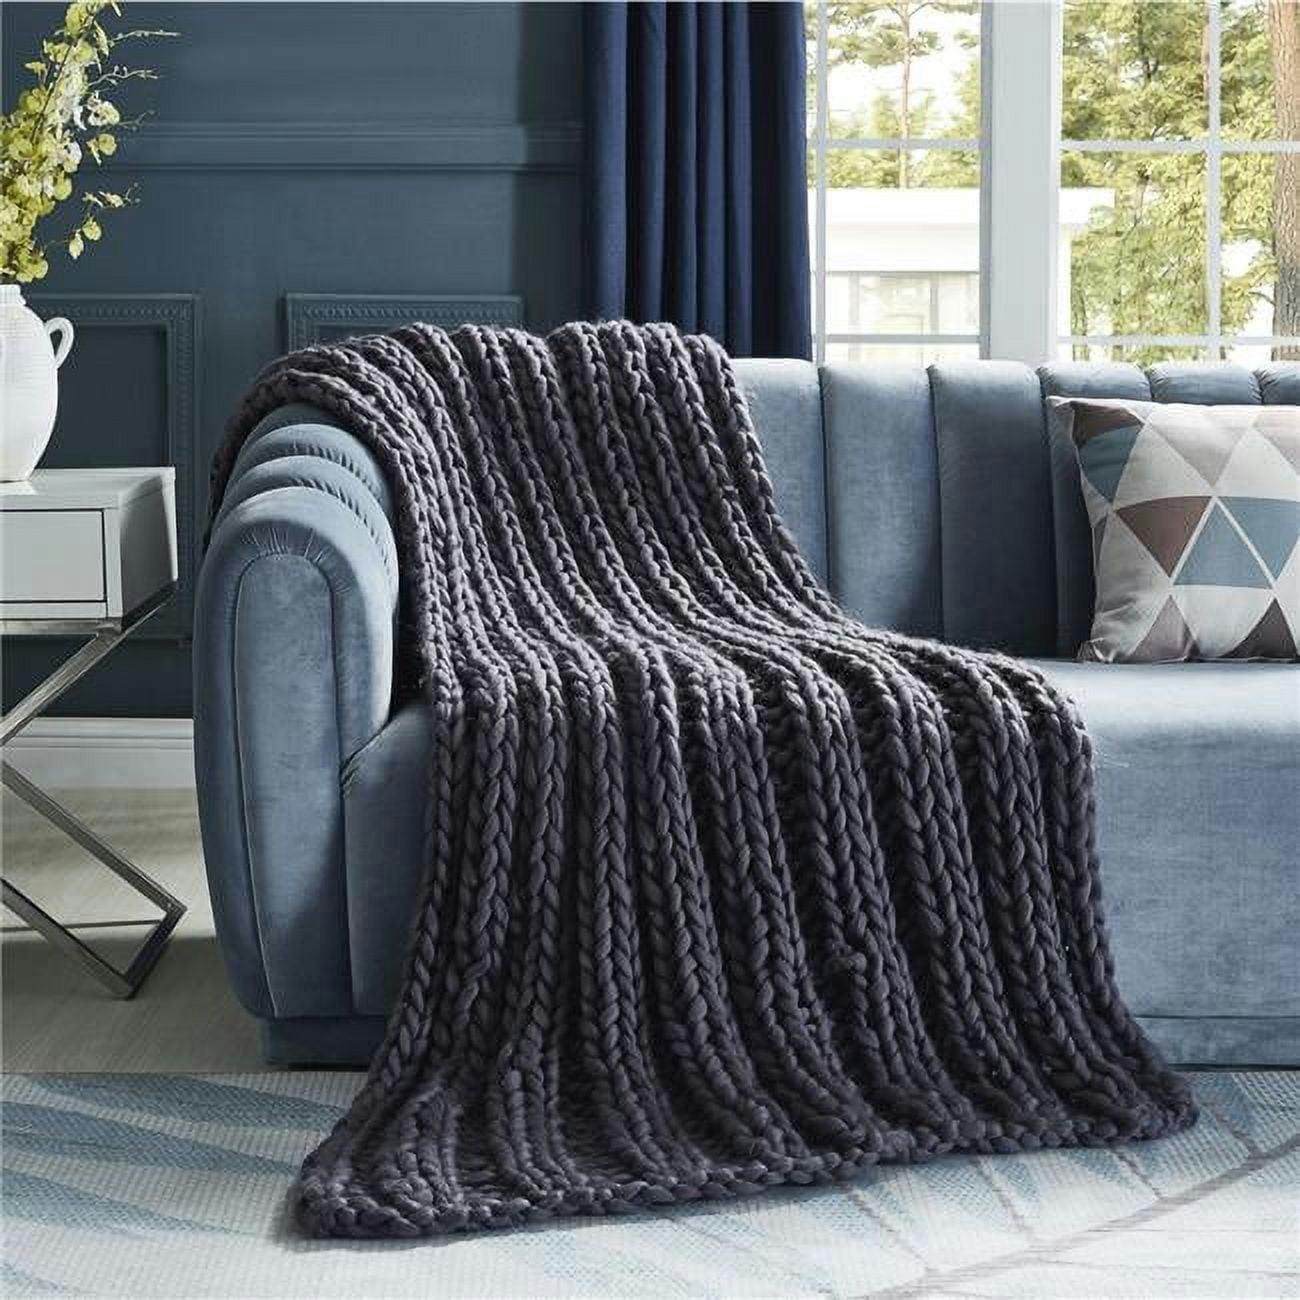 Sinclair Channel Knit and Sherpa Fleece Reversible Throw, 40 x 60 in., Dark Grey